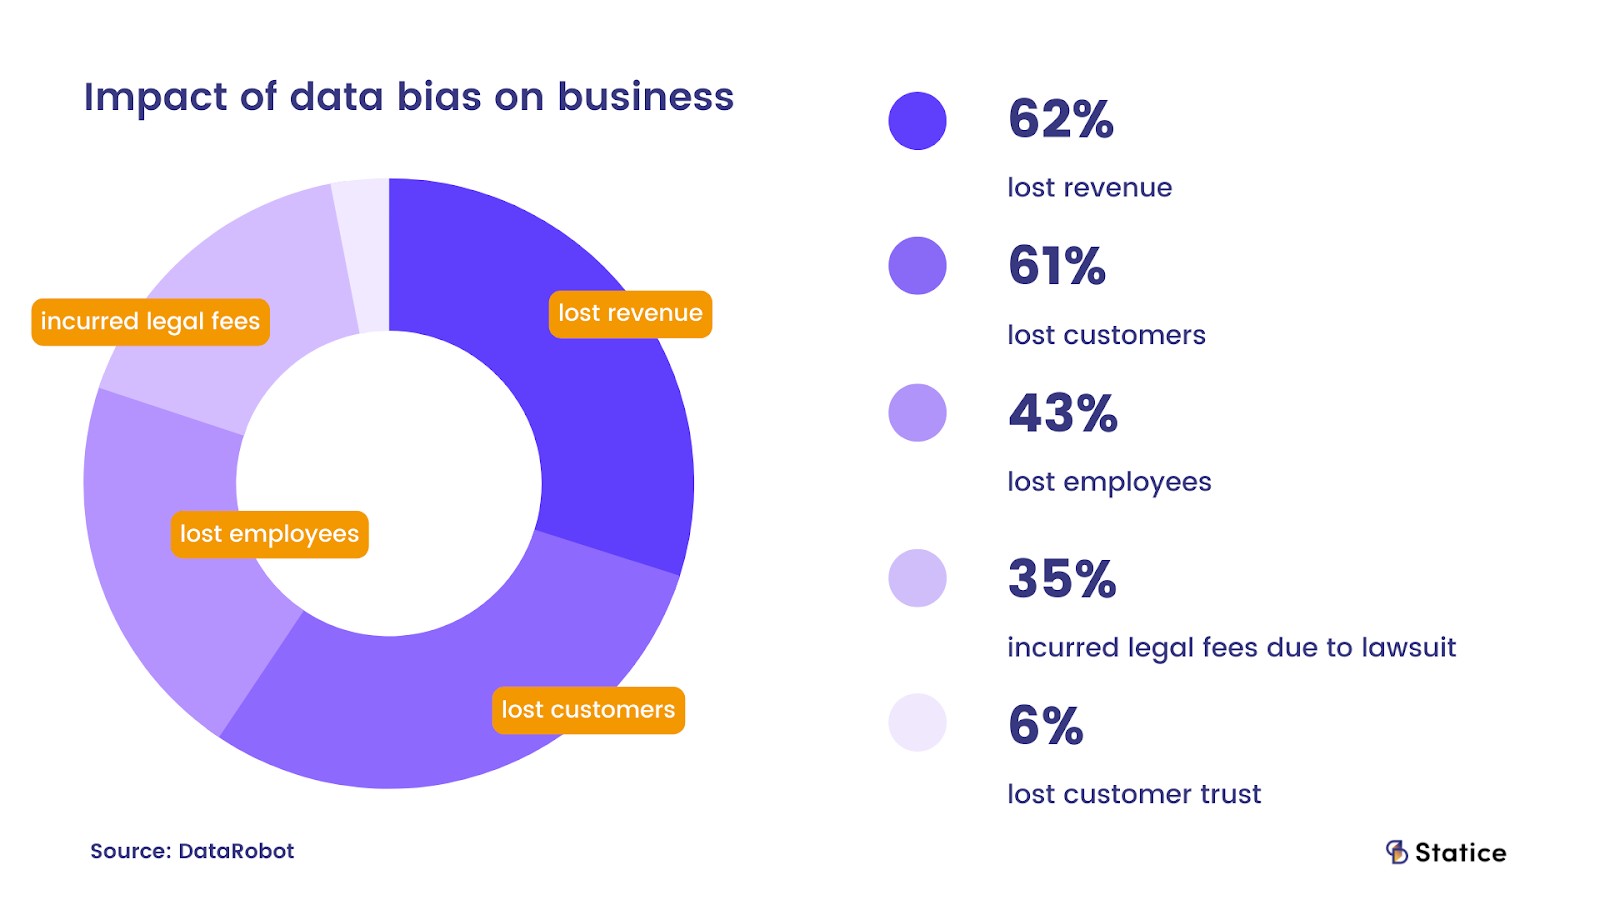 DataRobot’s 2022 survey found that the impact of data bias can result in as much as 62% lost revenue